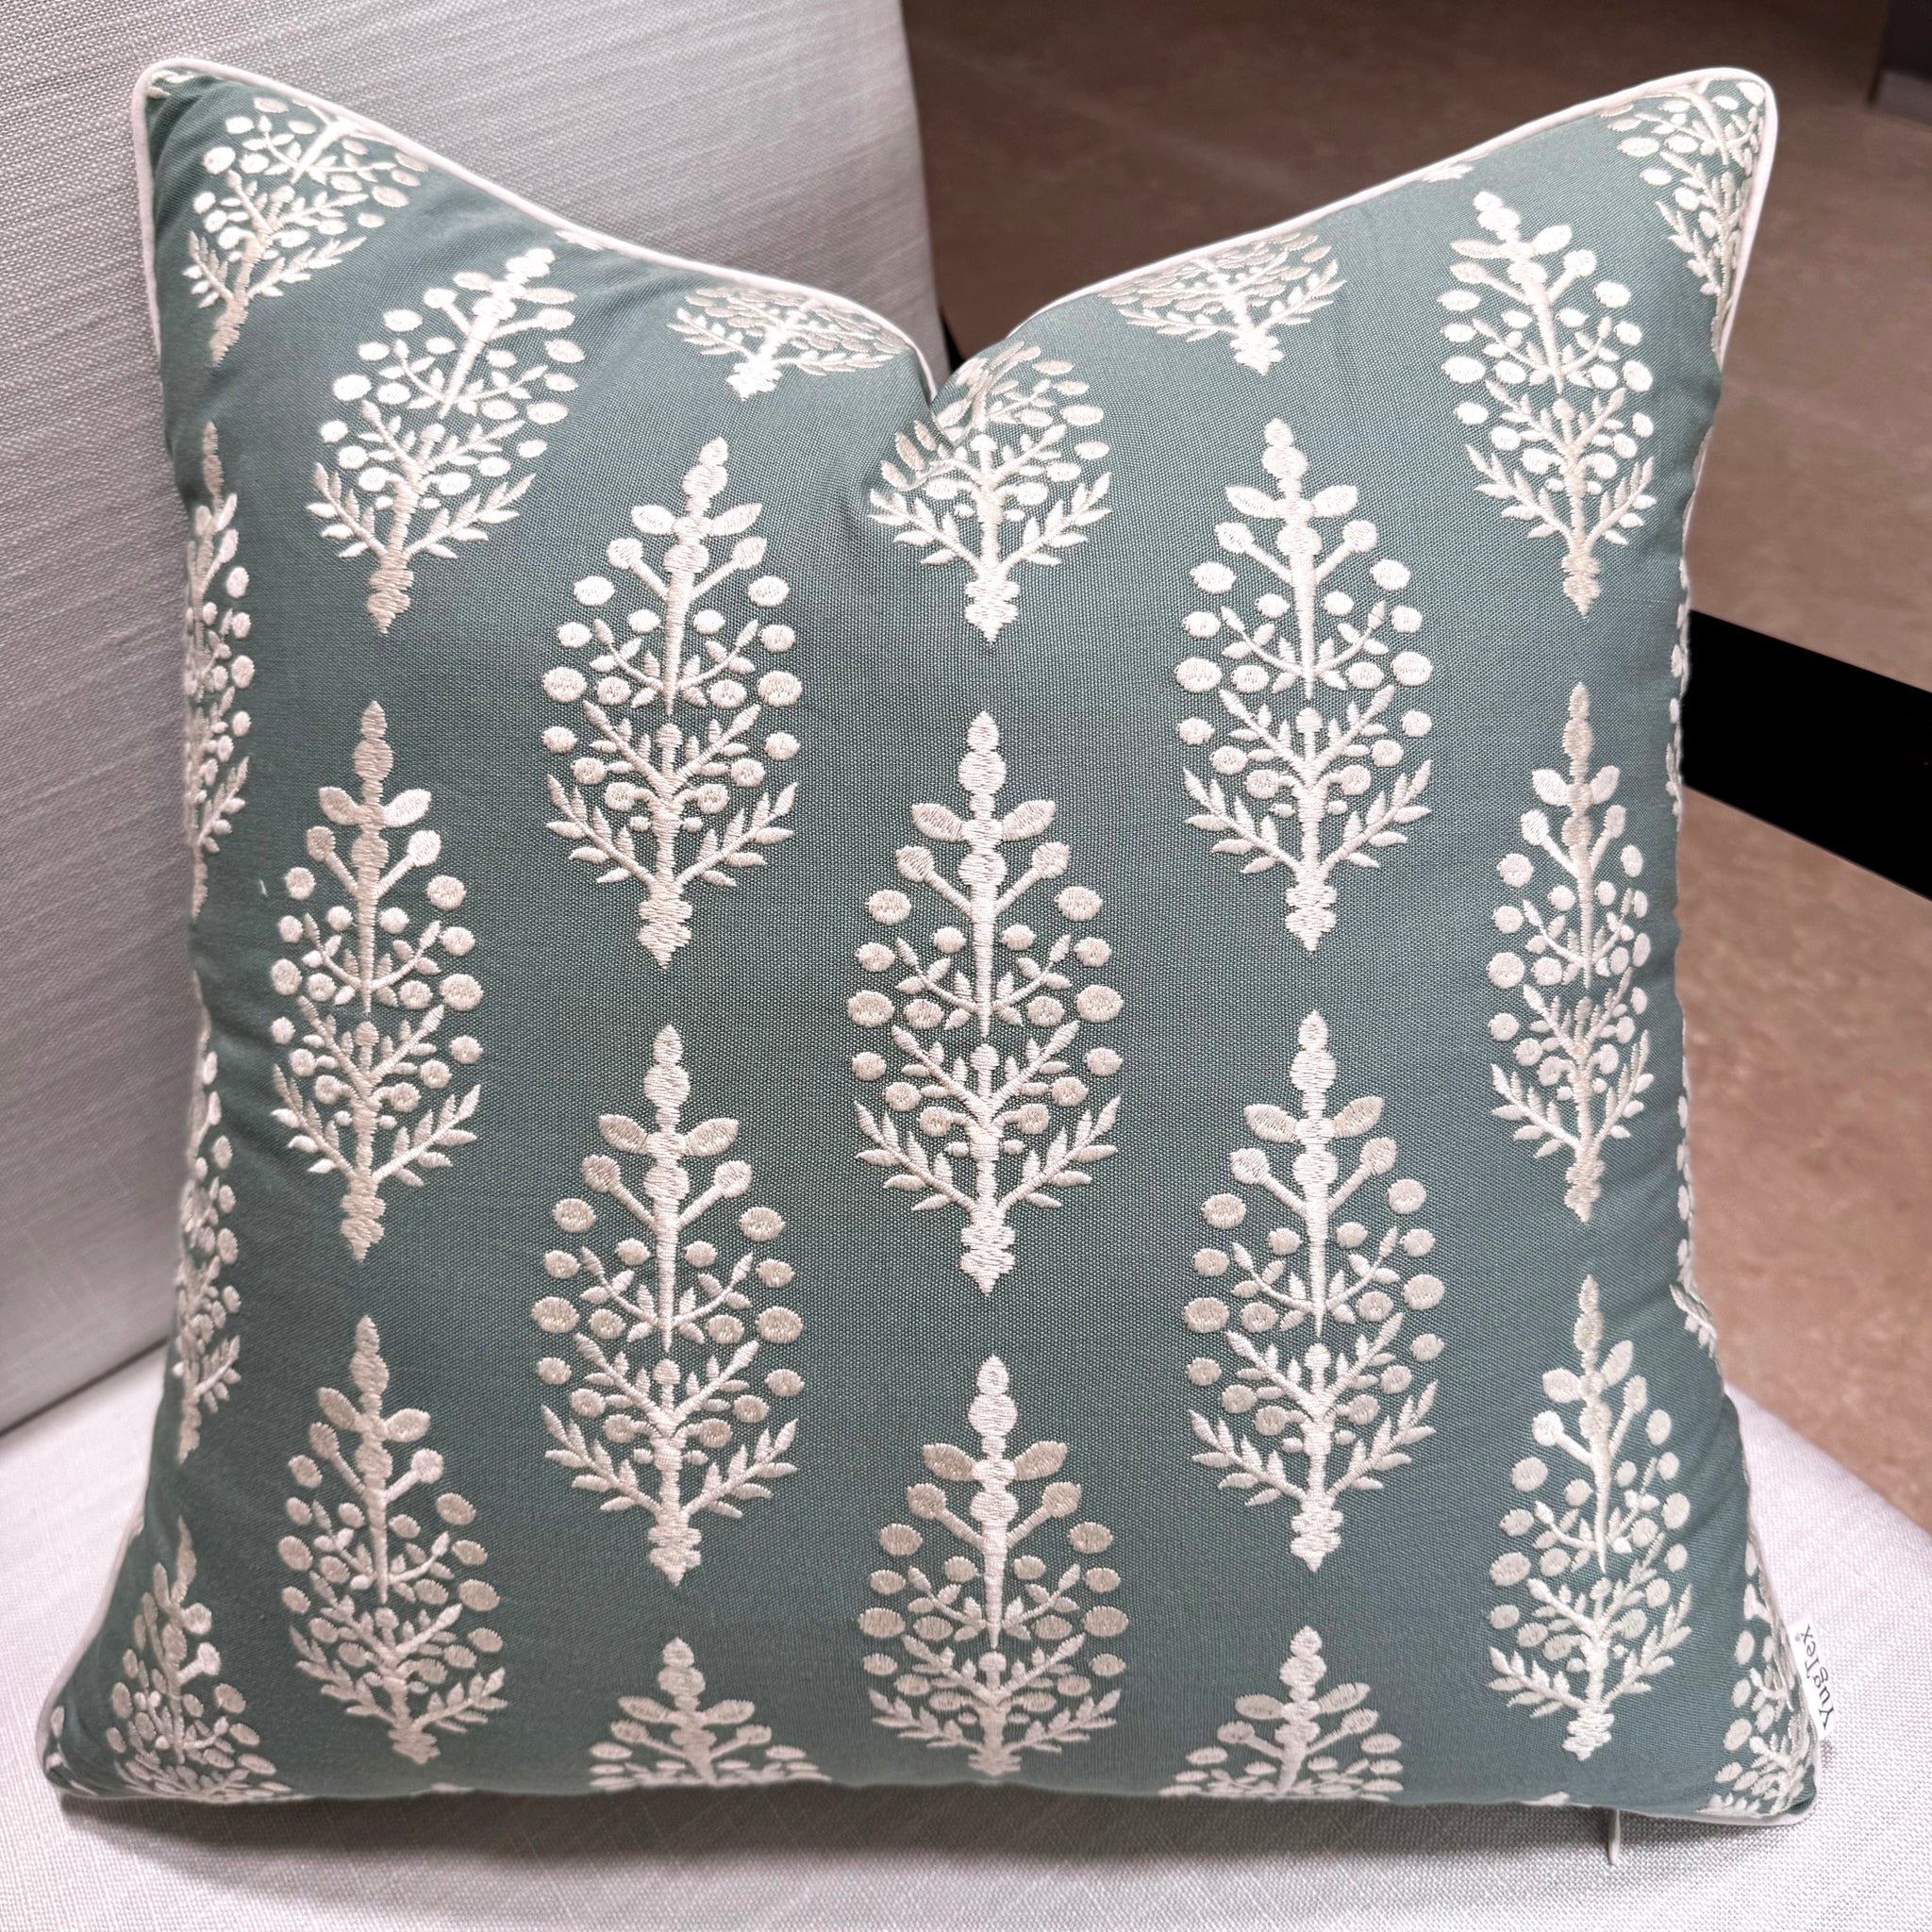 KYOMI TEAL Snow flower Cotton Handcrafted Embroidered Cushion Cover